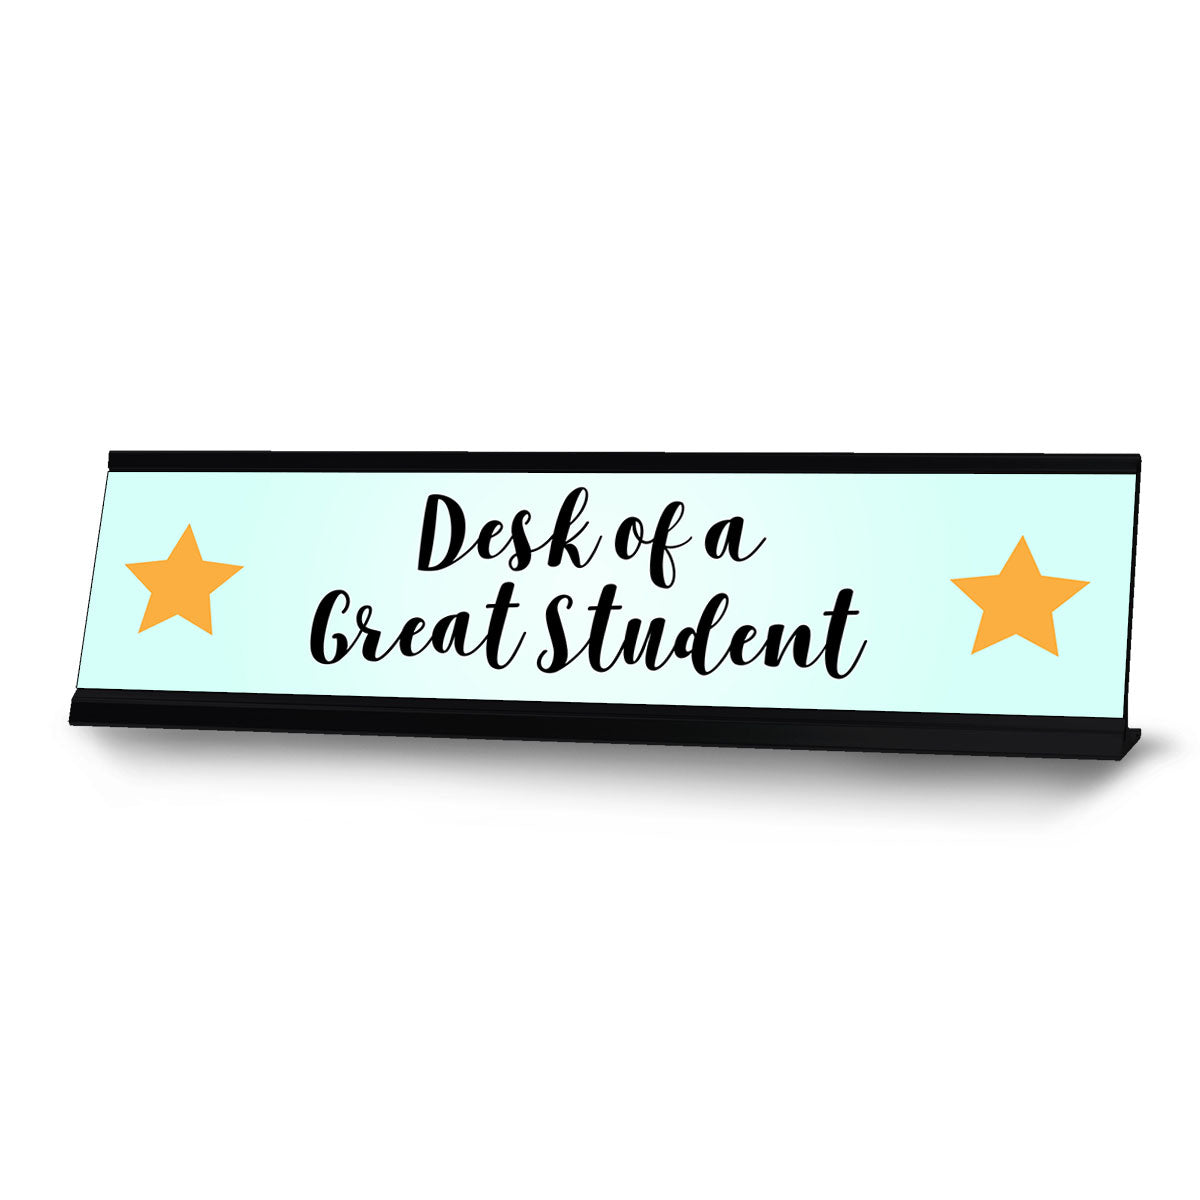 Desk of a Great Student, Desk Sign (2 x 8")